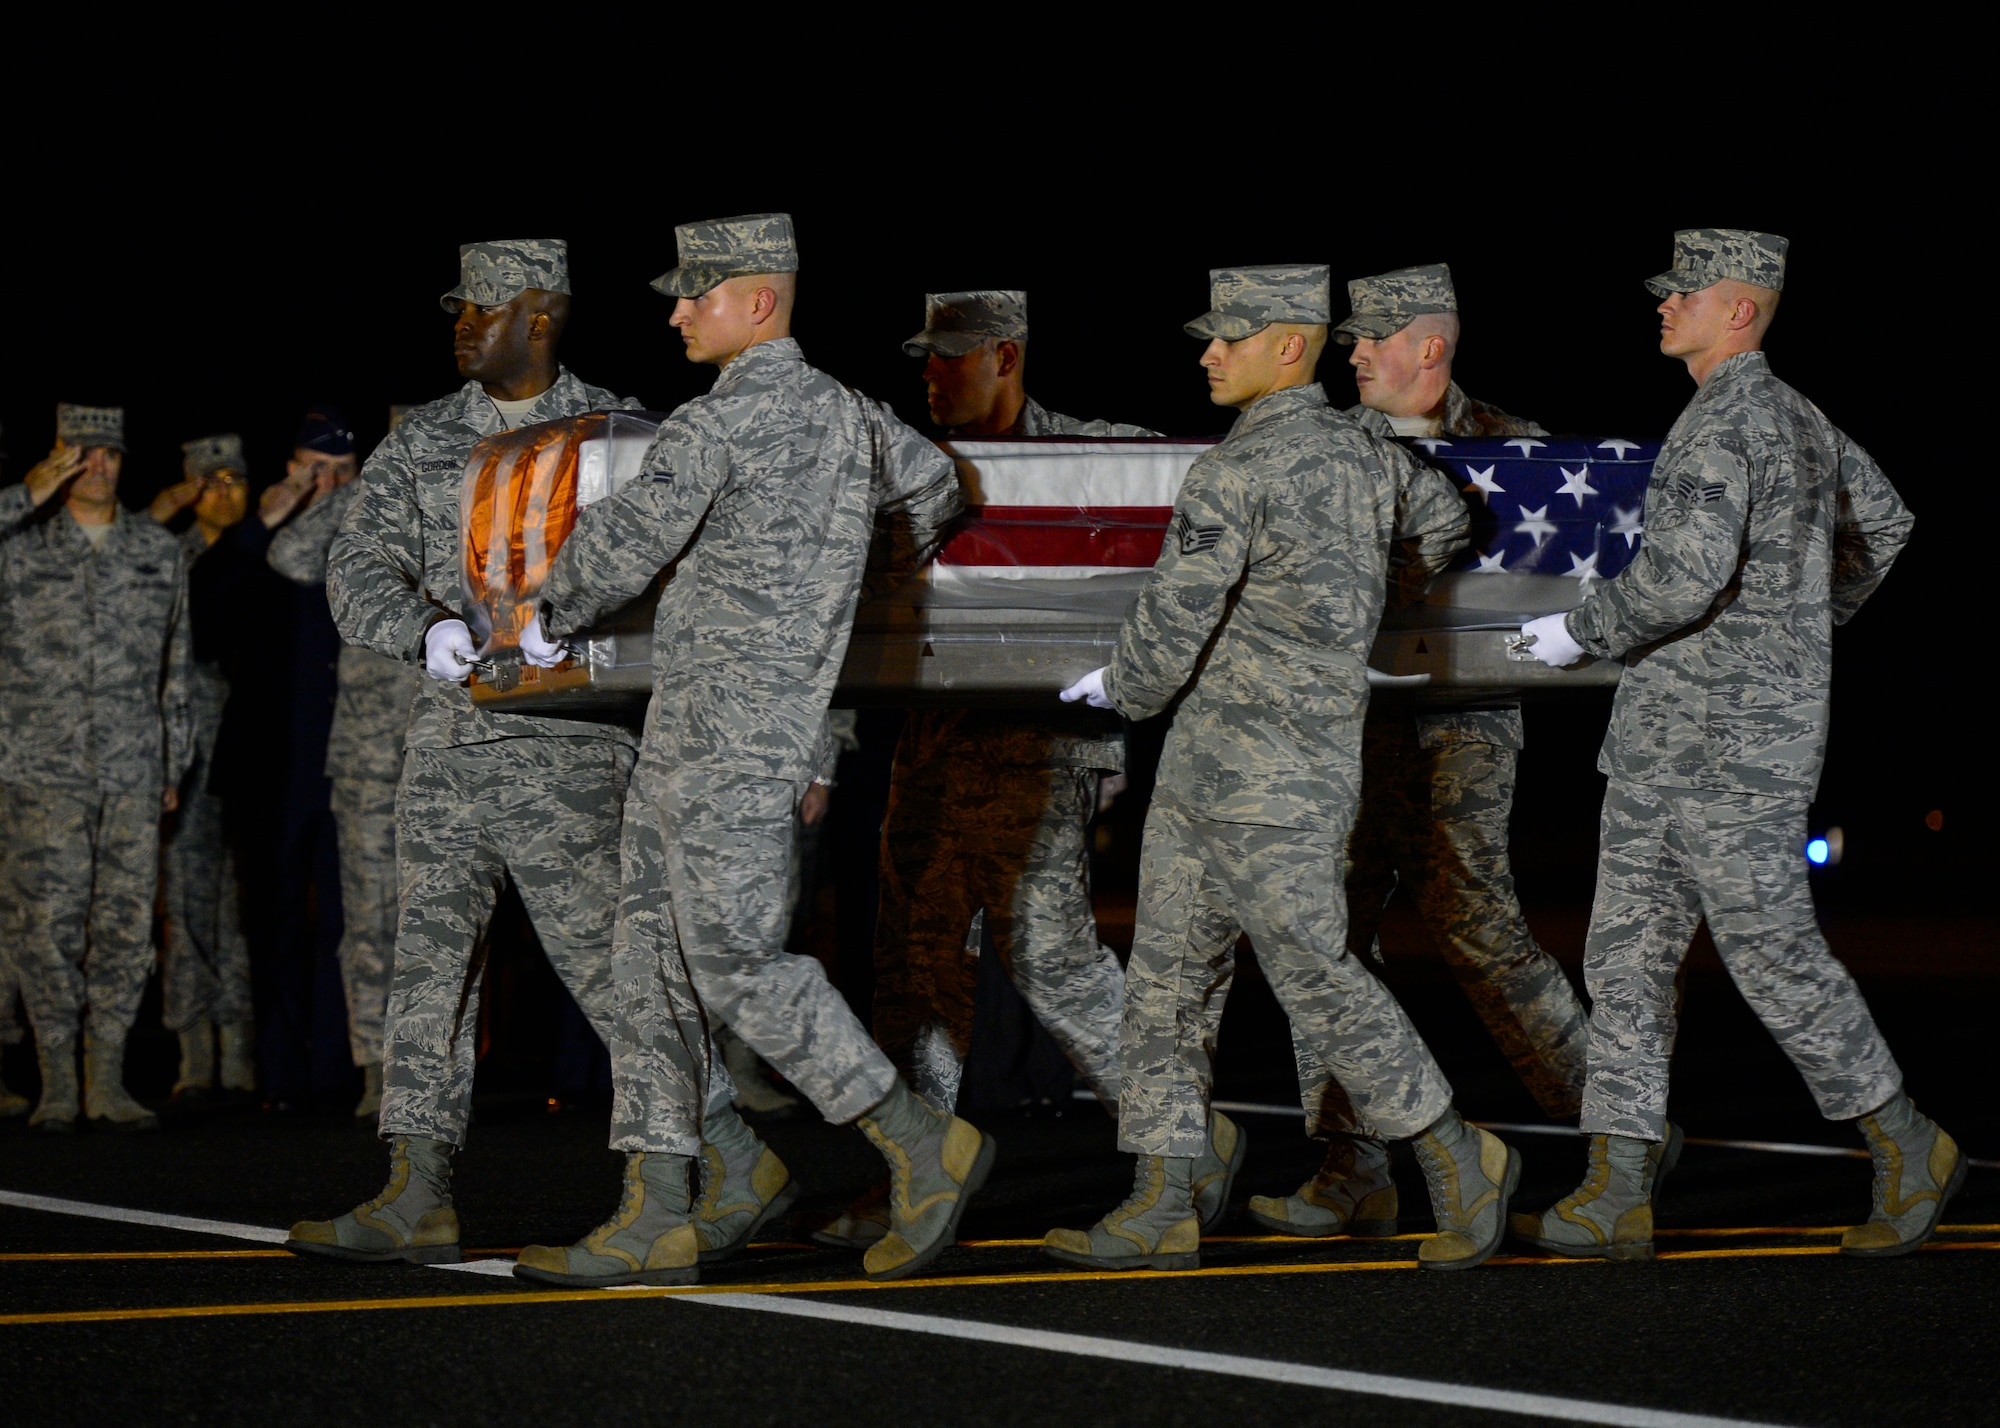 A U.S. Air Force carry team transfers the remains of U.S. Air Force Maj. Phyllis J. Pelky during a dignified transfer Oct. 13, 2015, at Dover Air Force Base, Del. (U.S. Air Force photo/Senior Airman Zachary Cacicia)
